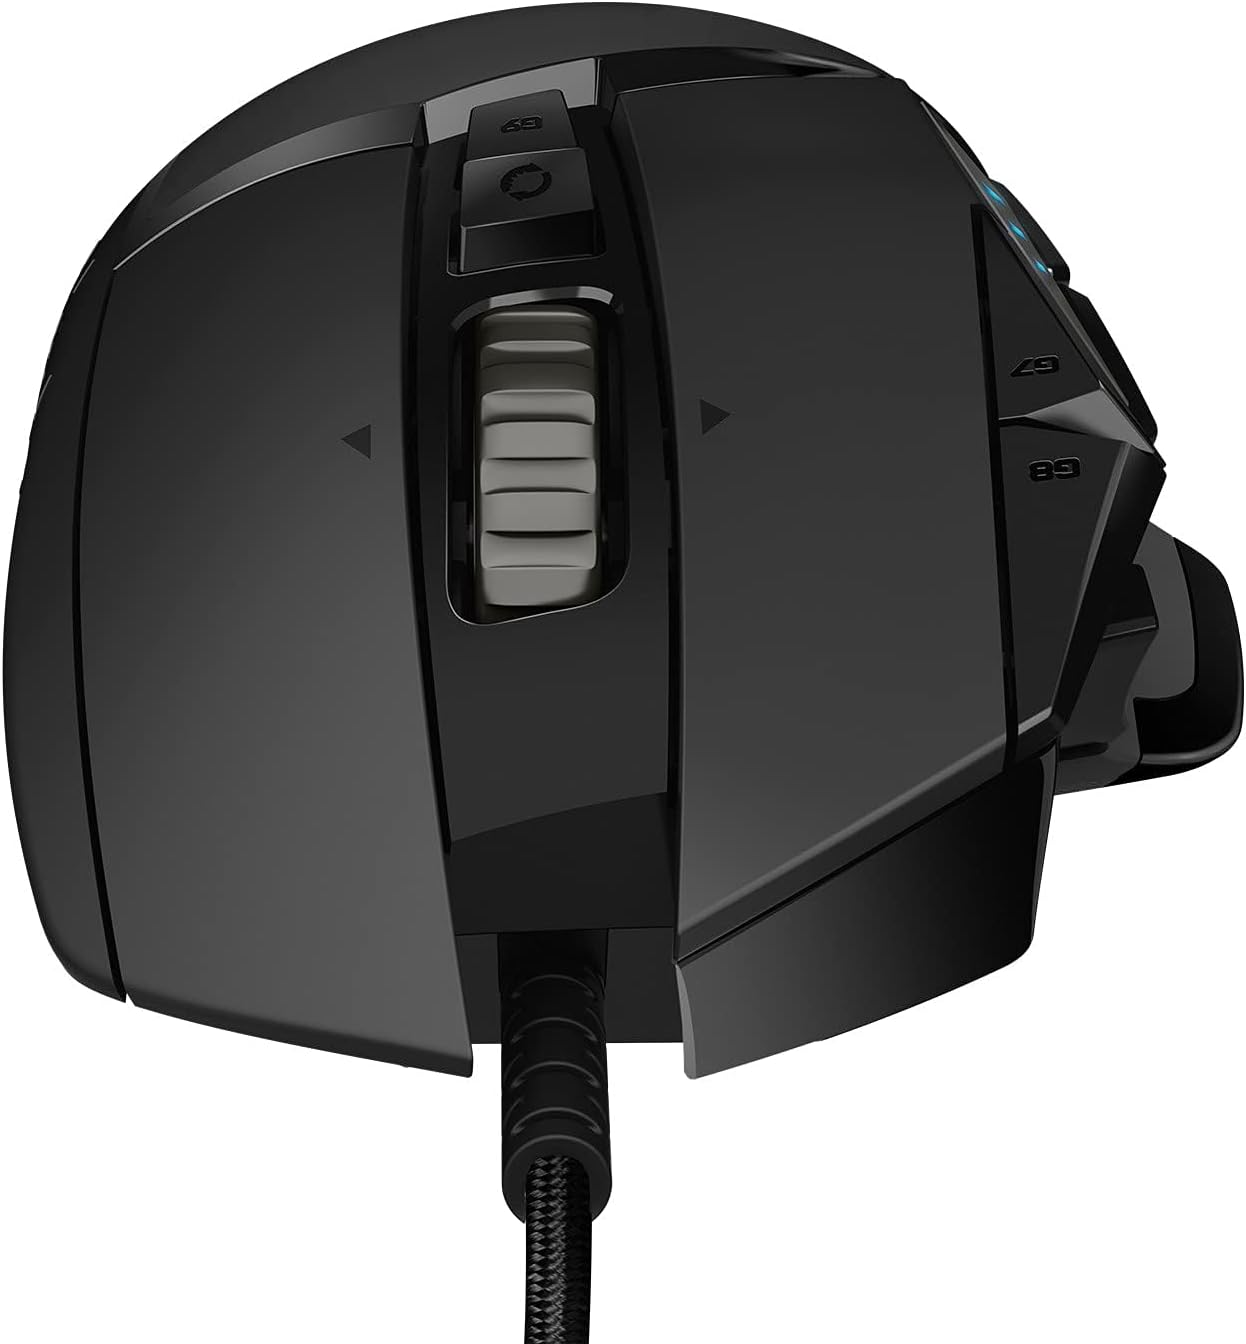 Logitech G502 HERO High-Performance Wired Gaming Mouse - Black (Refurbished)